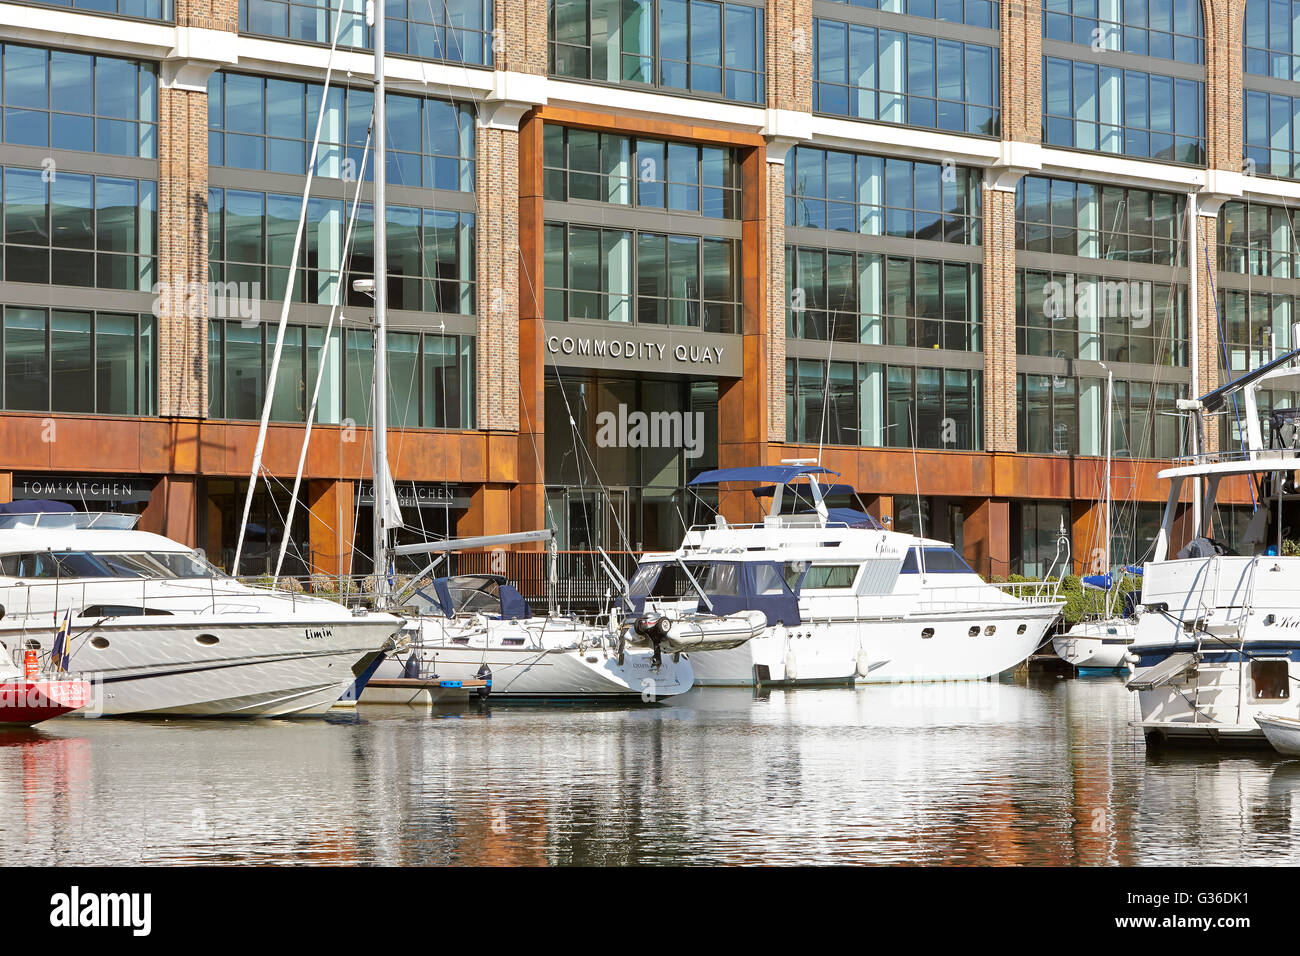 Line-up of yachts in front of building entrance. Commodity Quay, London, United Kingdom. Architect: BuckleyGrayYeoman, 2014. Stock Photo